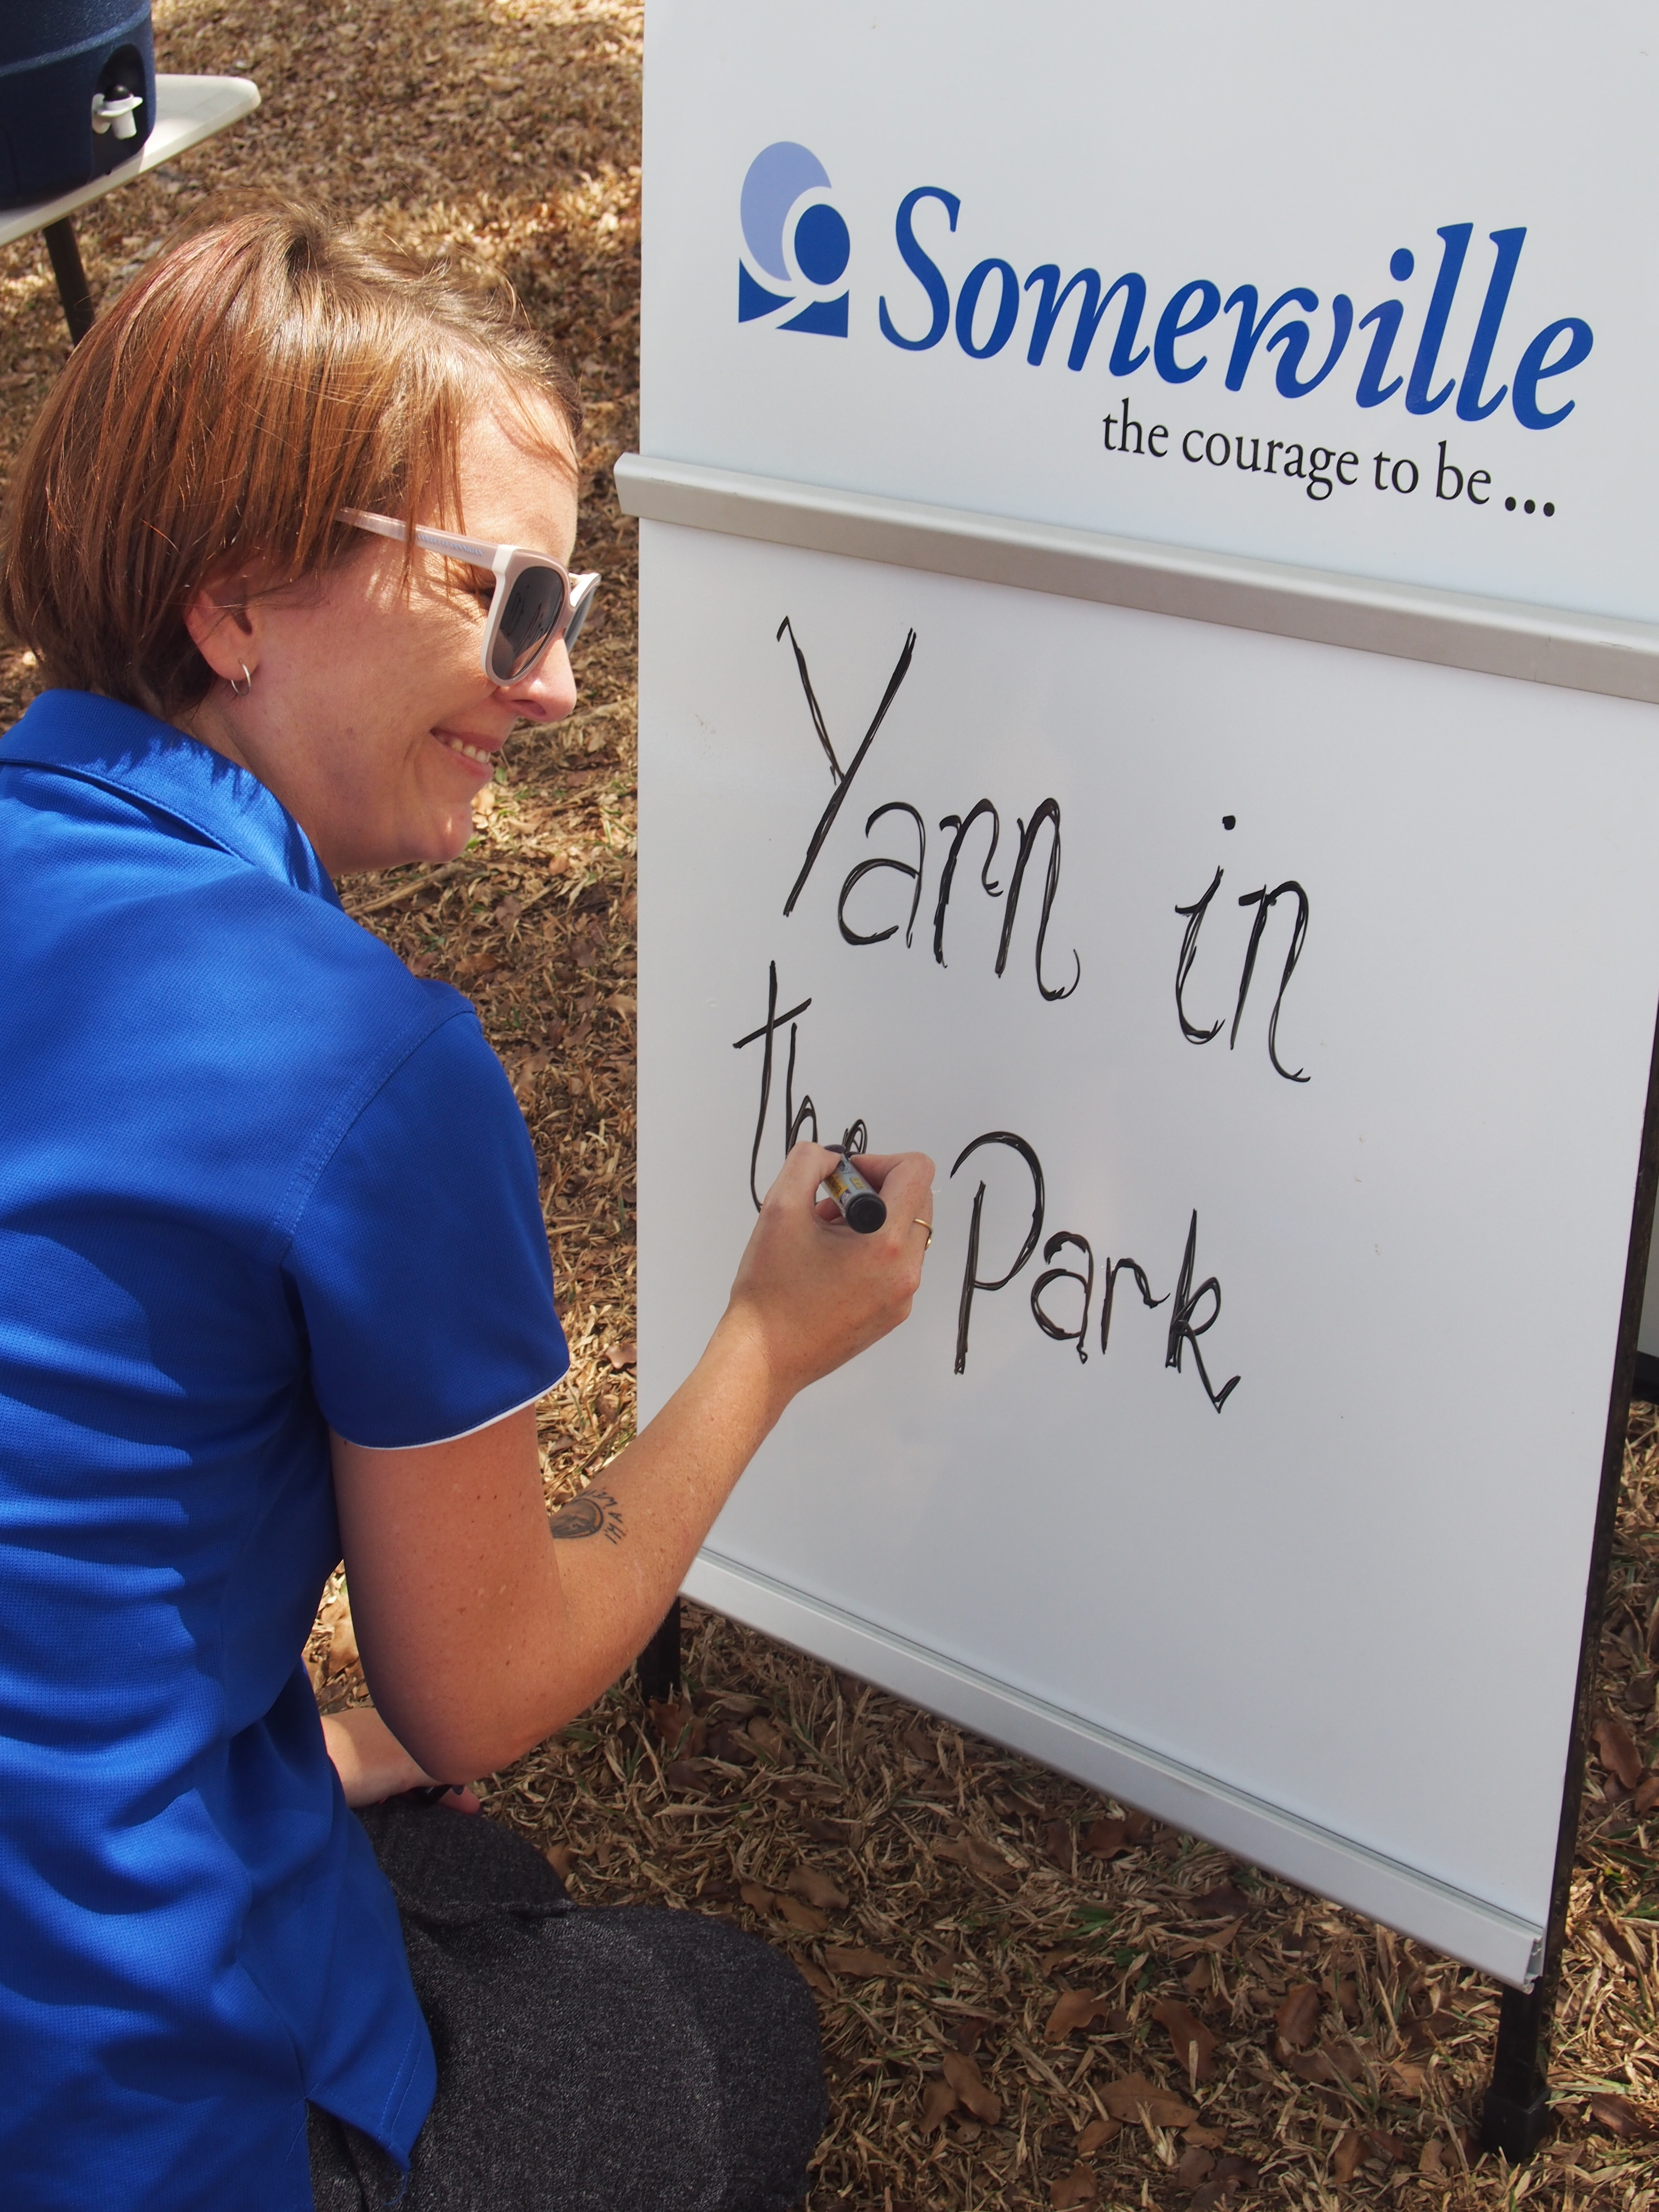 Somerville staffer writes &quot;Yarn in the Park&quot; on a whiteboard.